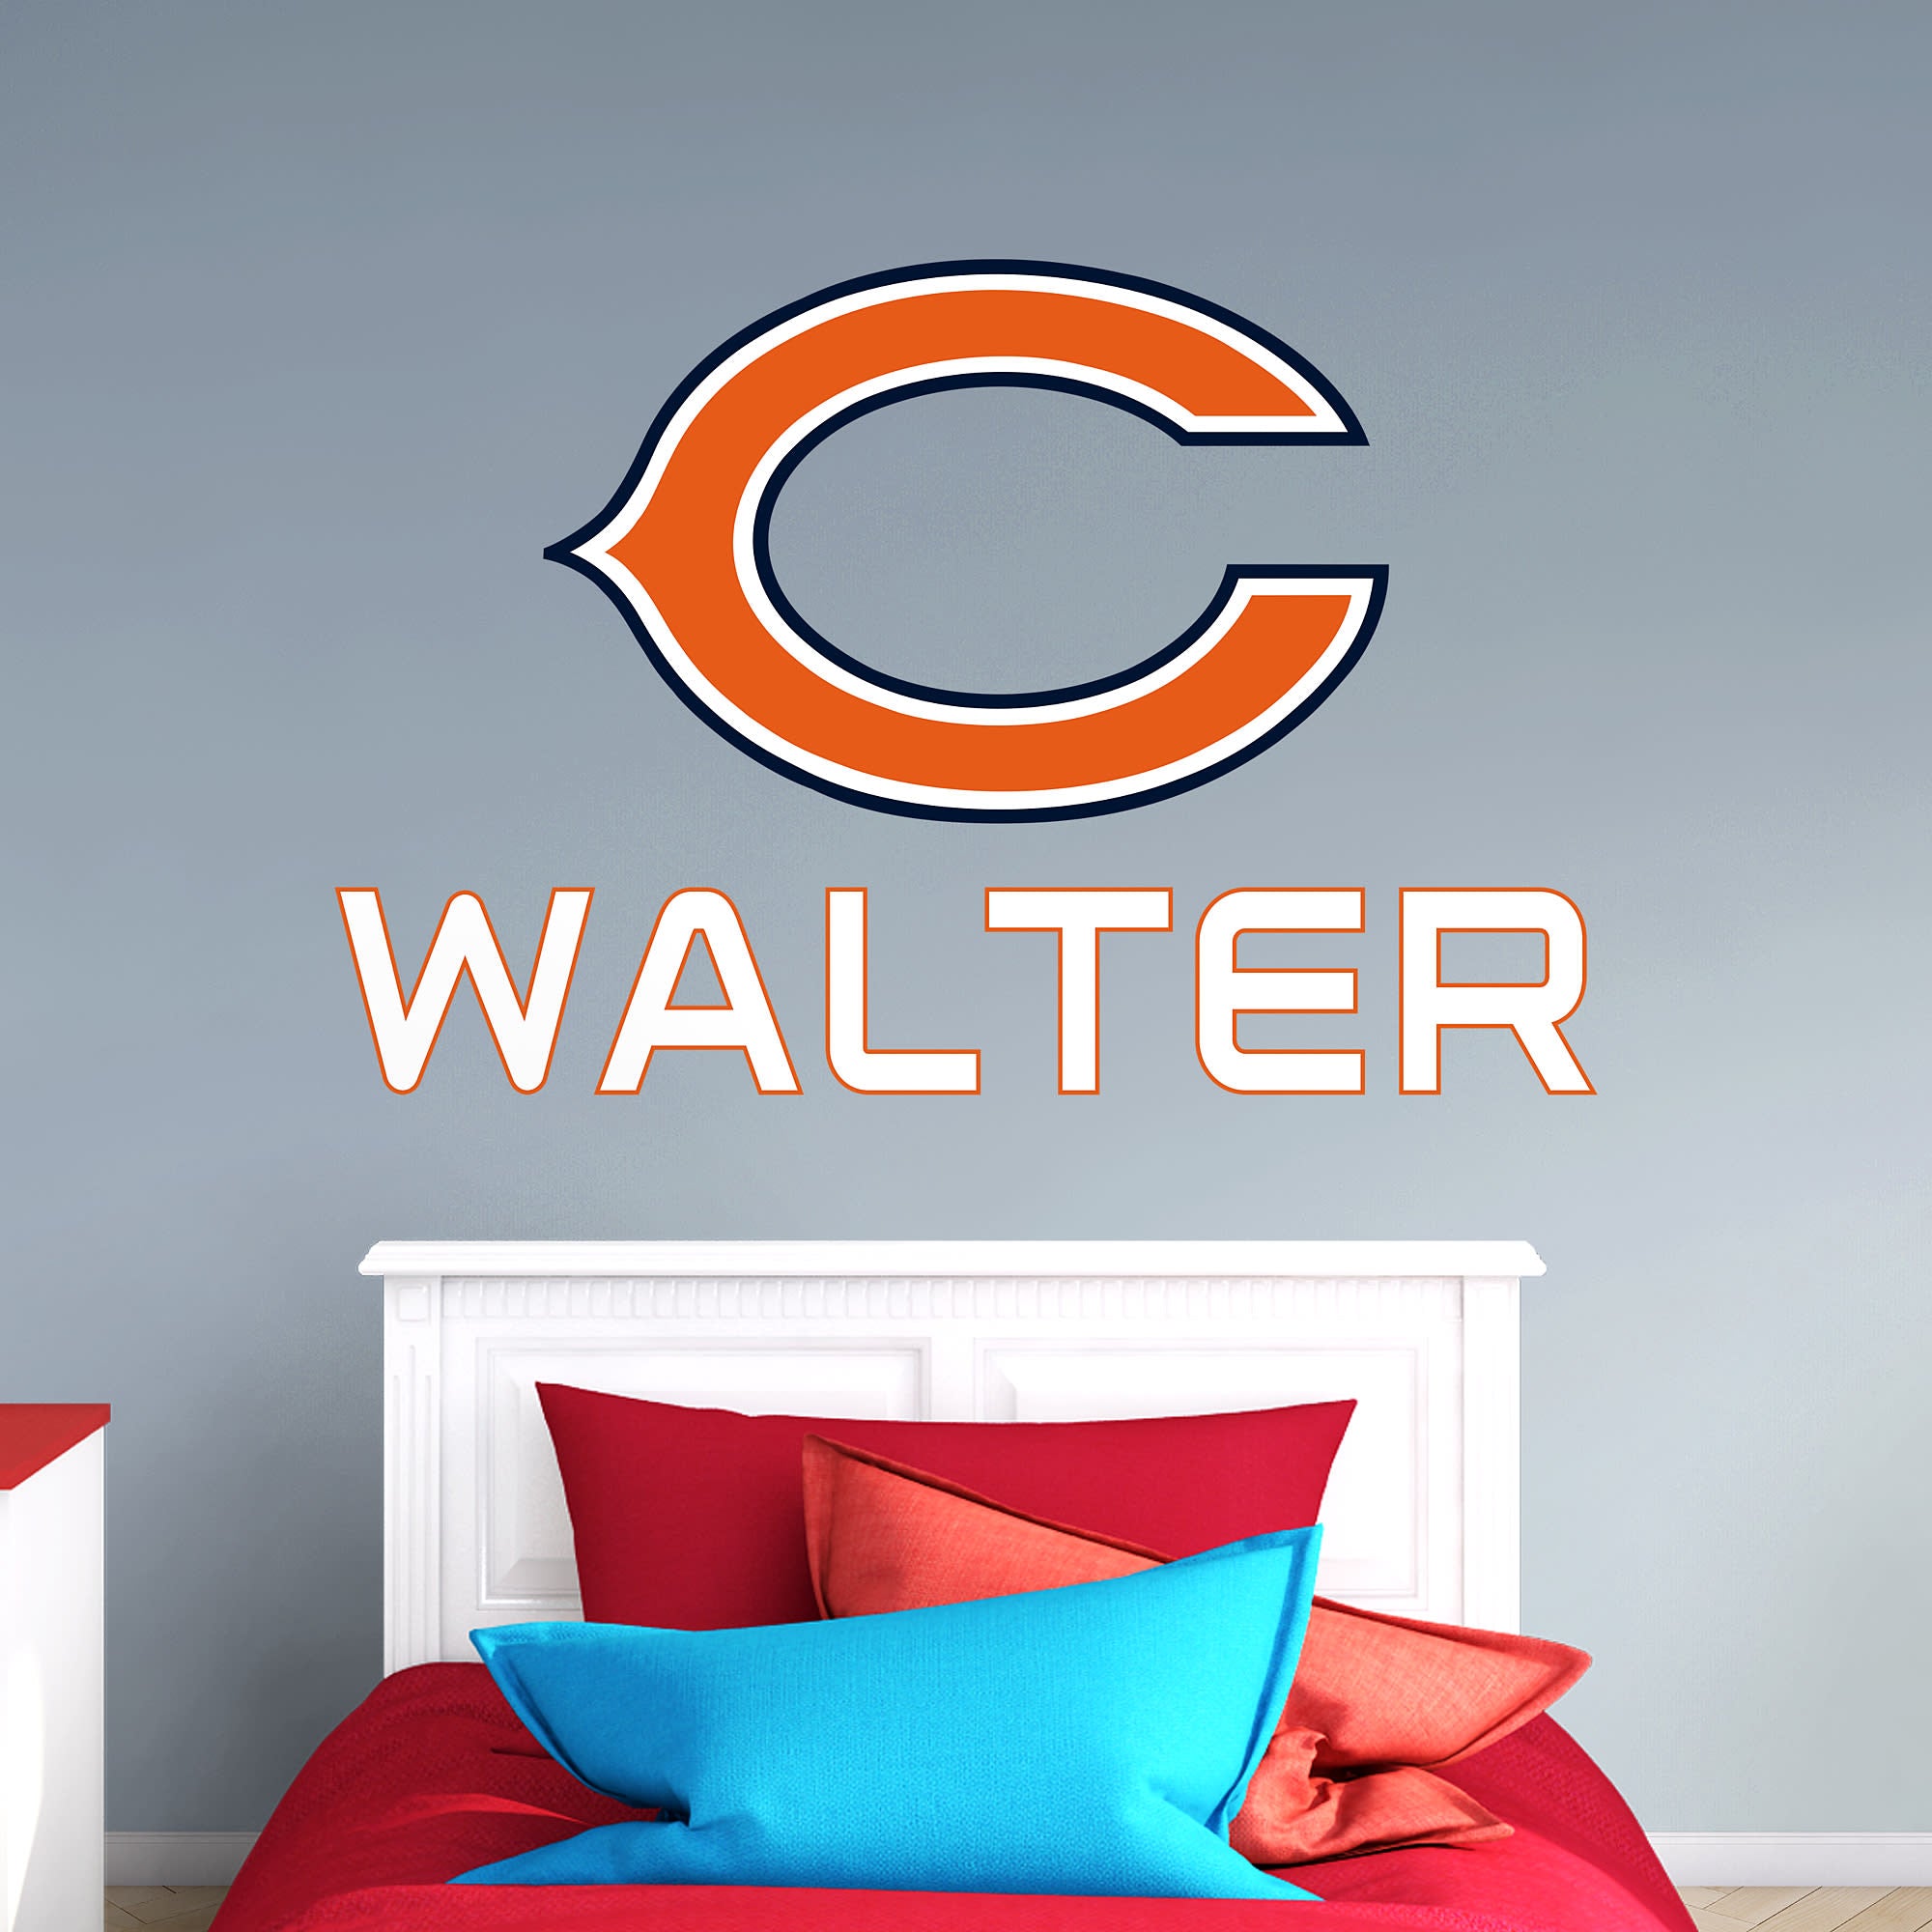 Chicago Bears: "C" Stacked Personalized Name - Officially Licensed NFL Transfer Decal in White (52"W x 39.5"H) by Fathead | Viny